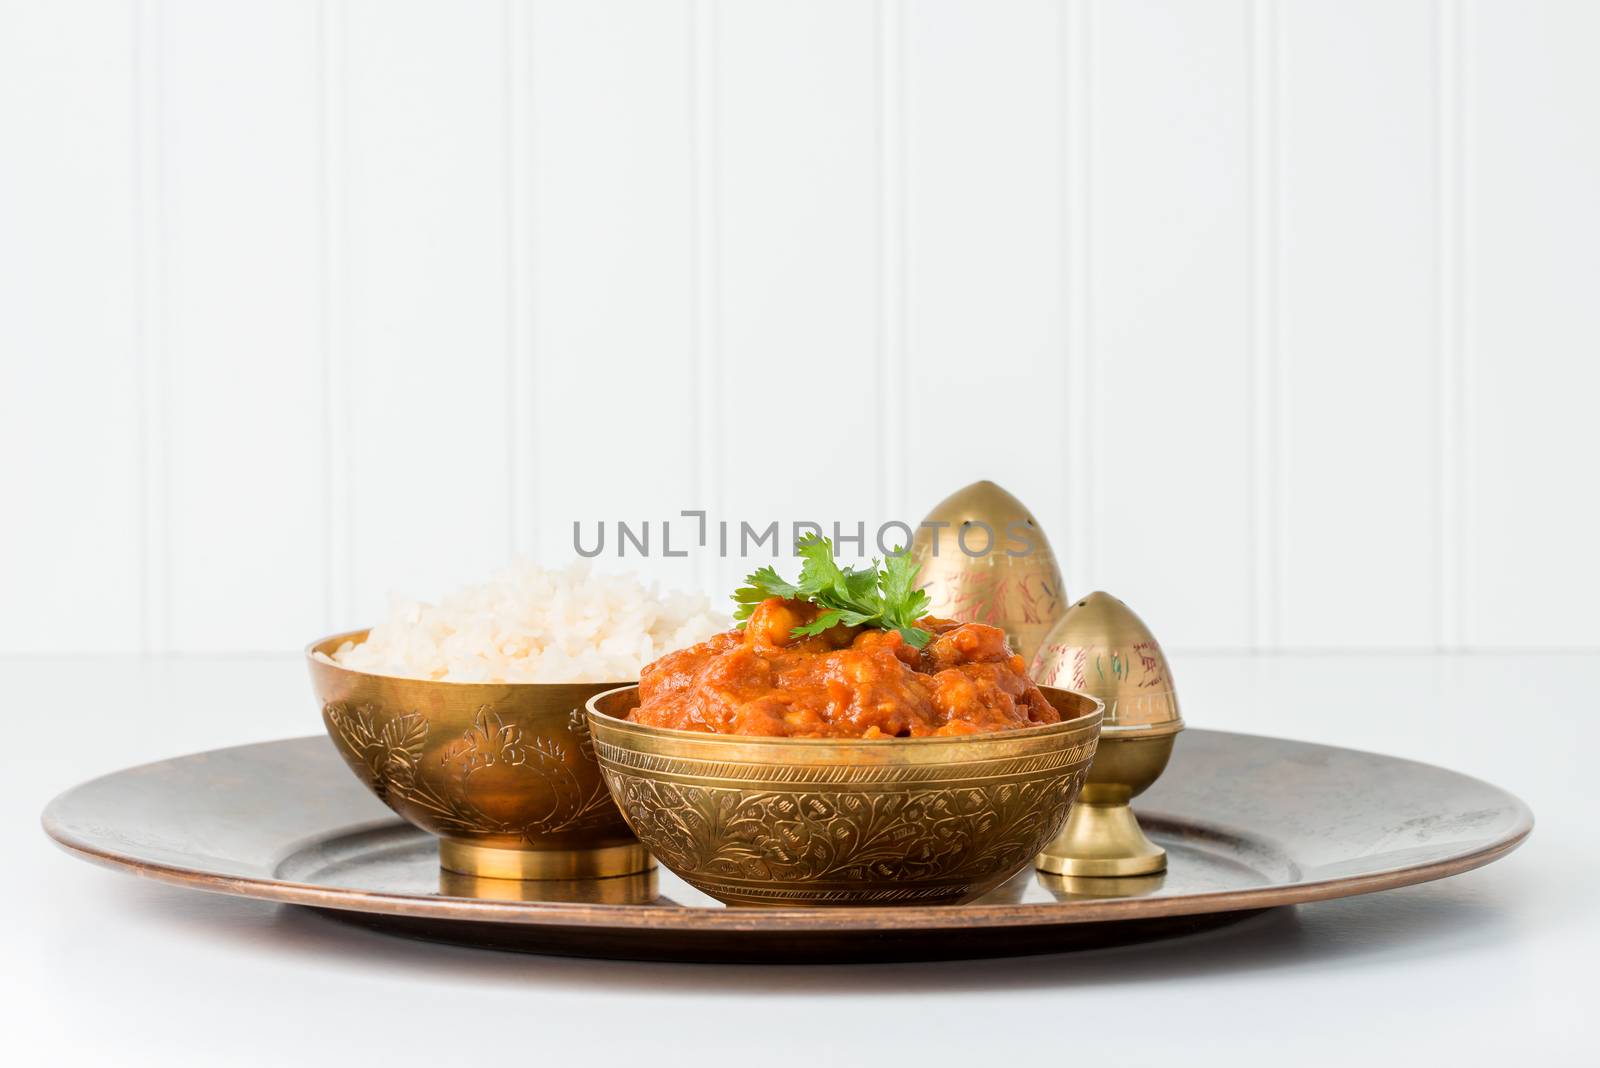 East Indian chana masala served with white rice.